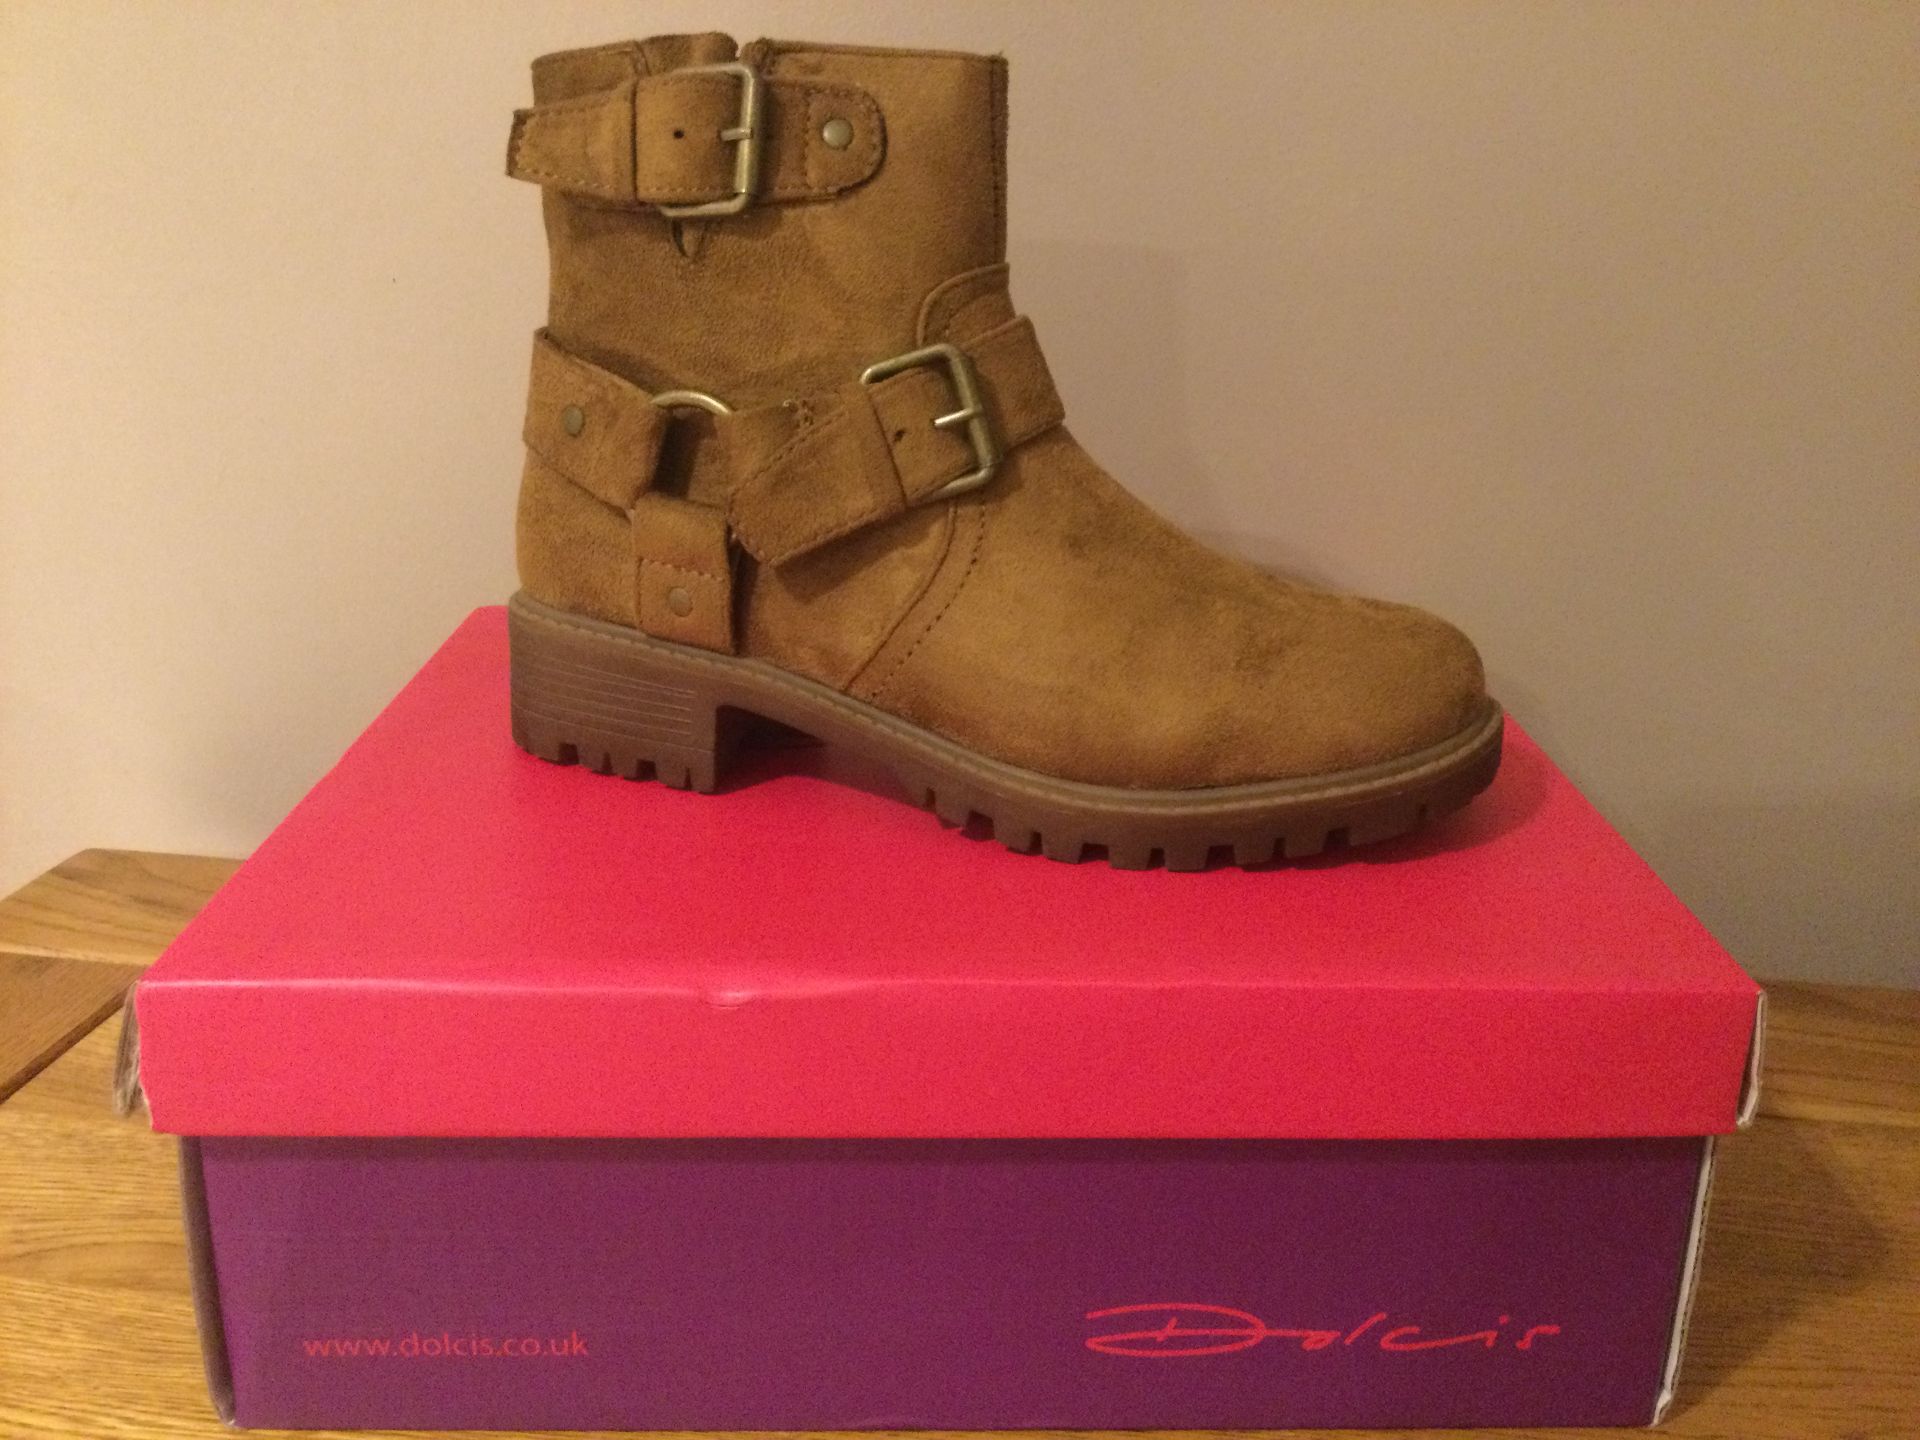 Dolcis “Davis” Ankle Boots, Size 4, Tan - New RRP £49.00 - Image 2 of 4